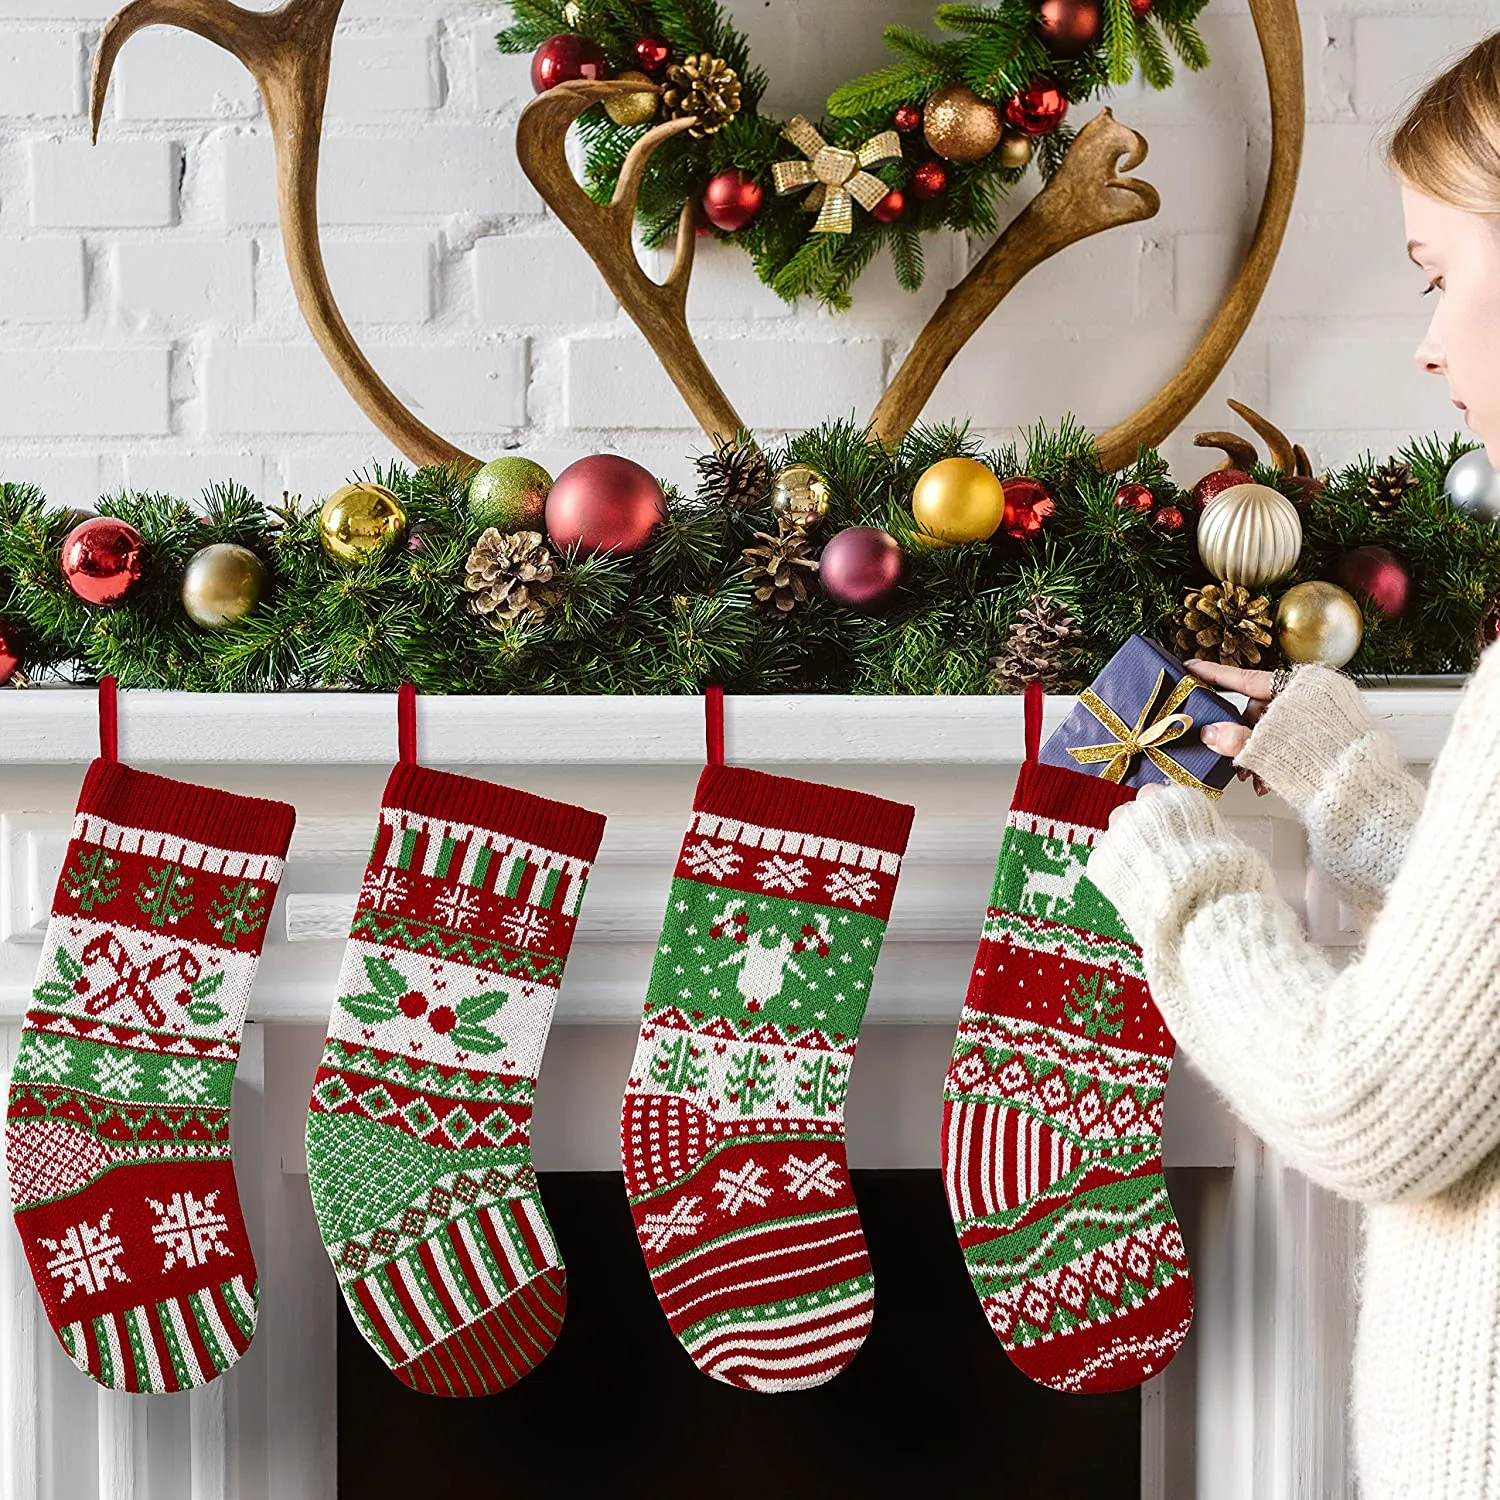 50+ Christmas Decorating Ideas 2023 That You Have to Try